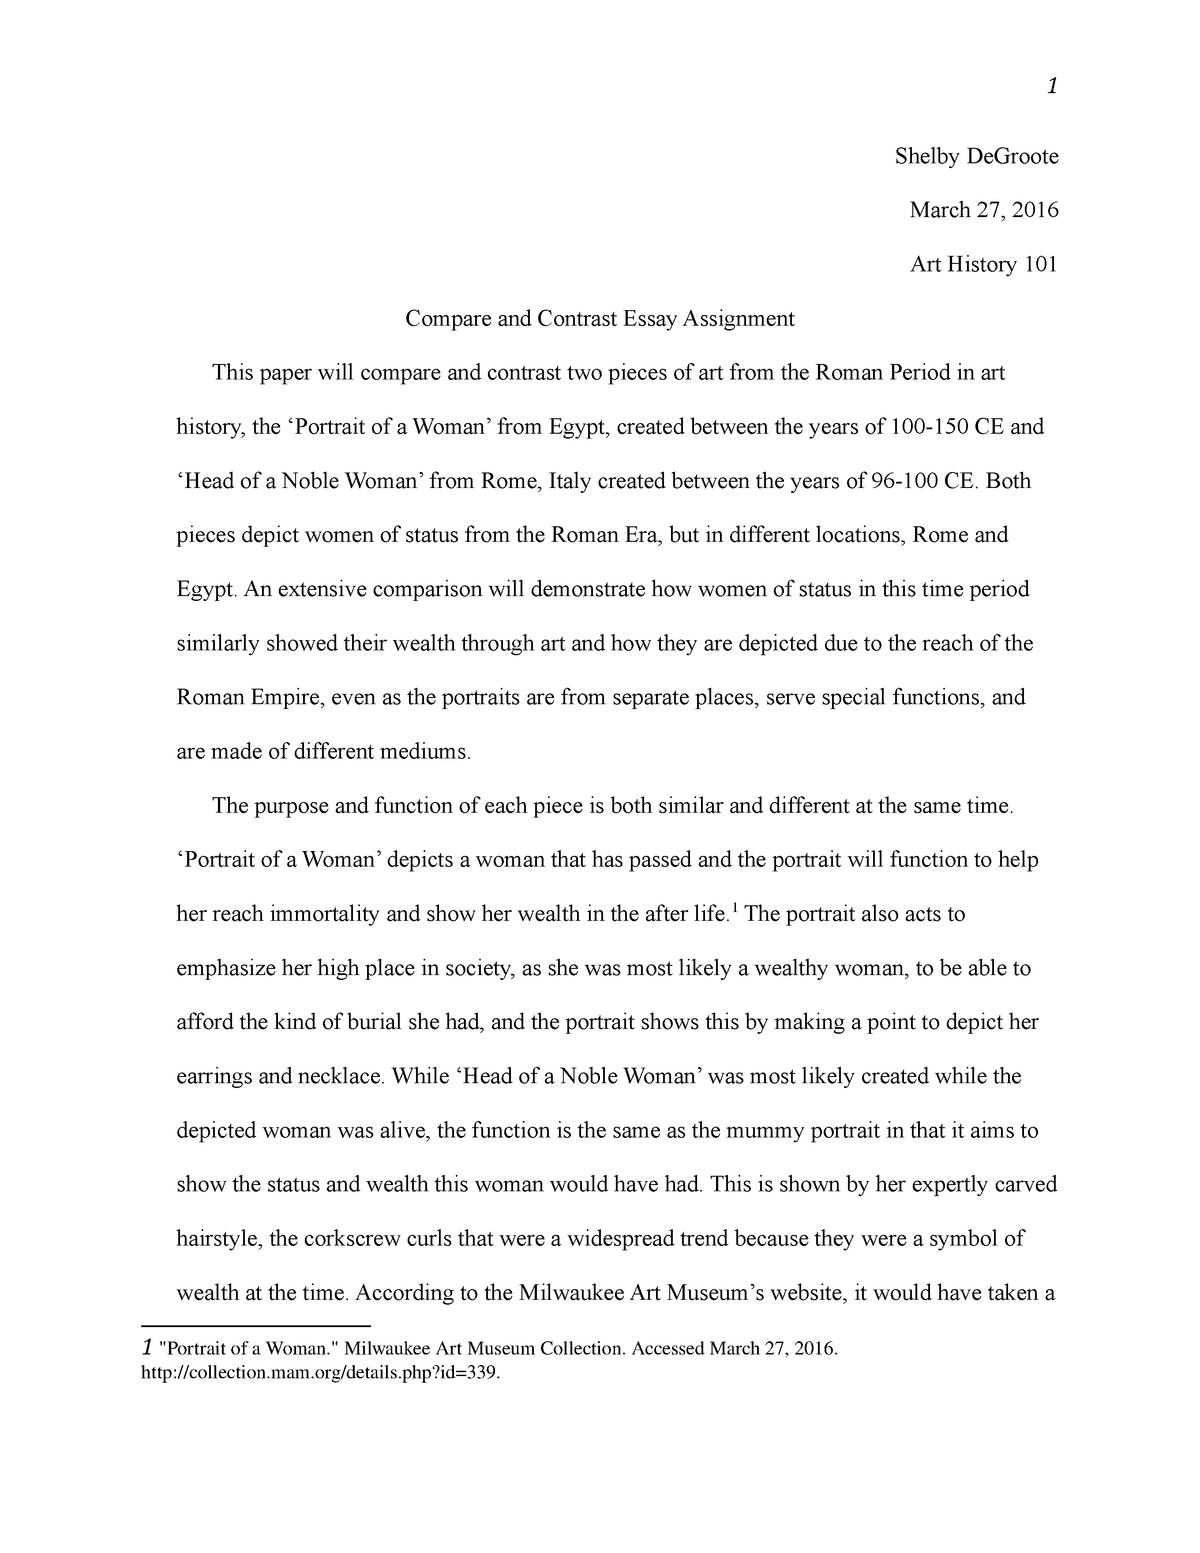 art history compare and contrast essay